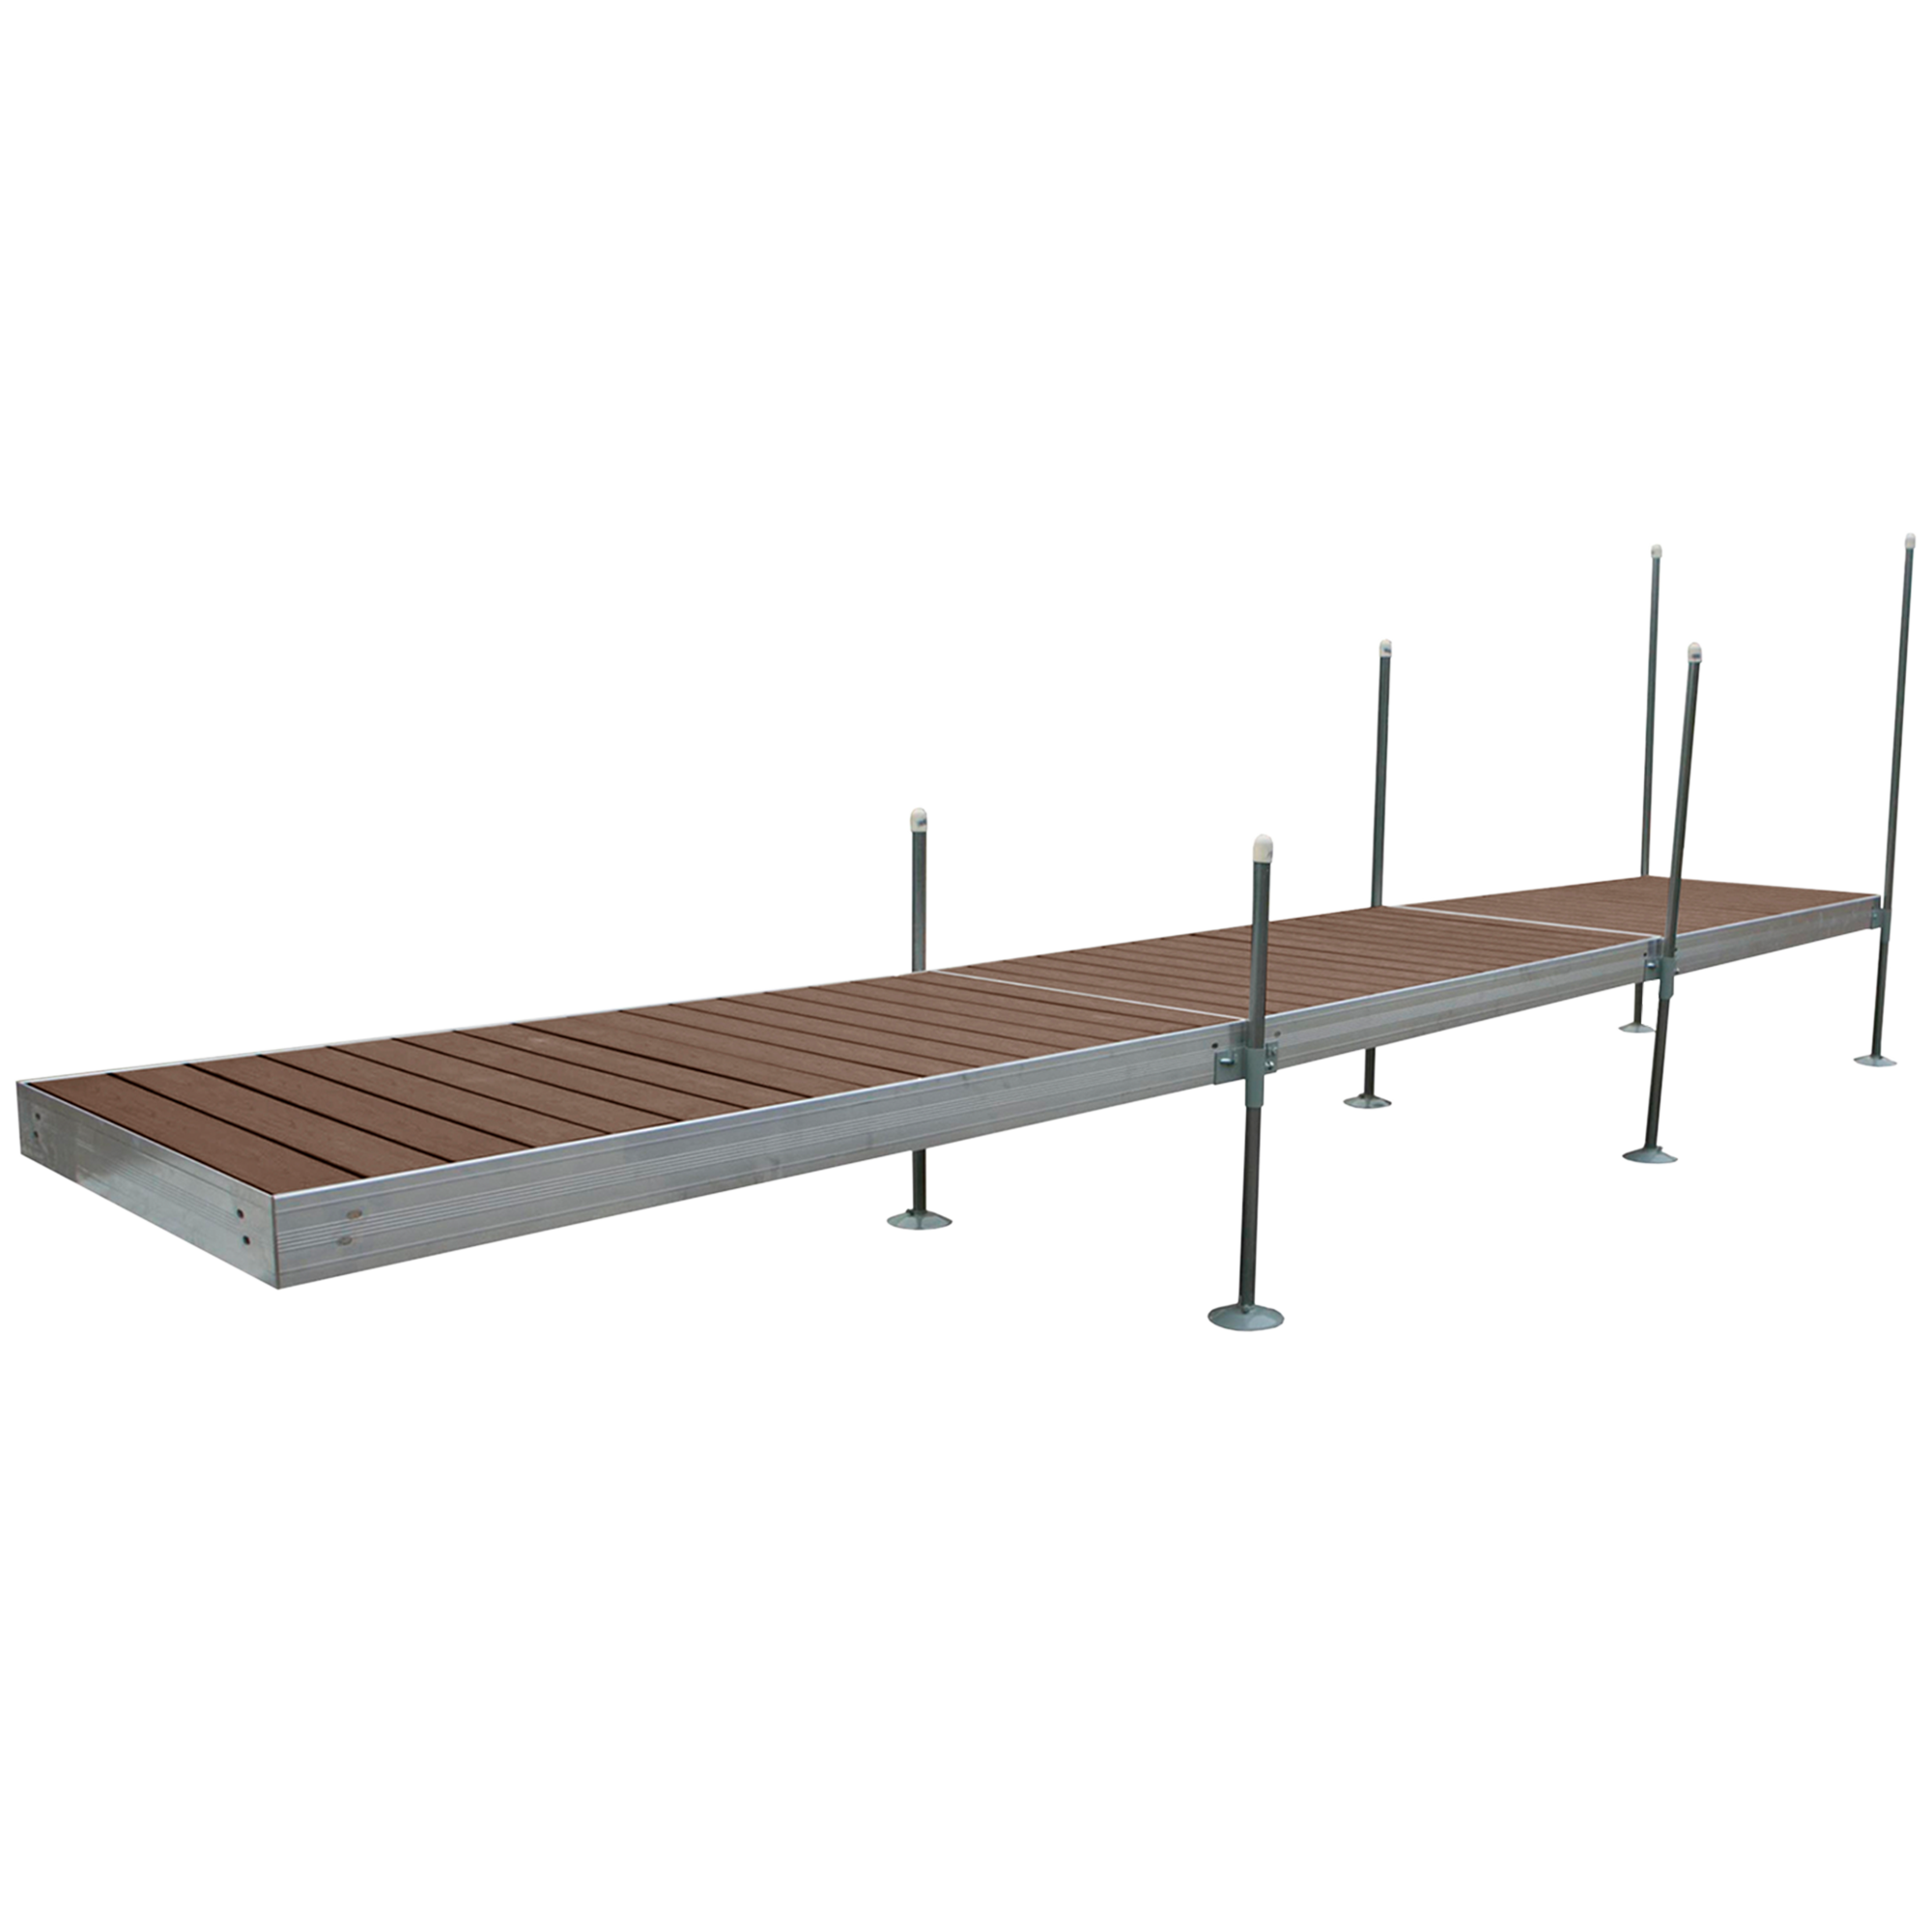 24' Straight Boat Dock System with Aluminum Frame and Brown Composite Decking